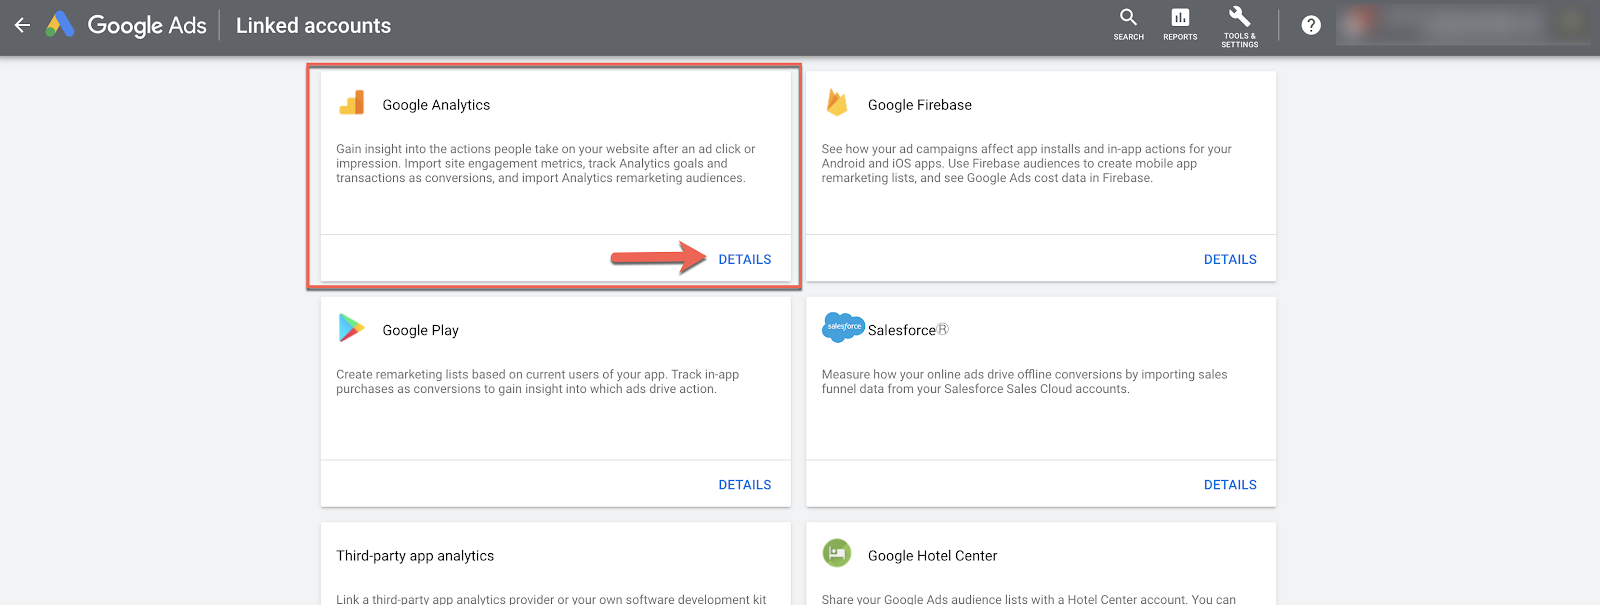 linking google analytics to google ads for auto tagging google ads